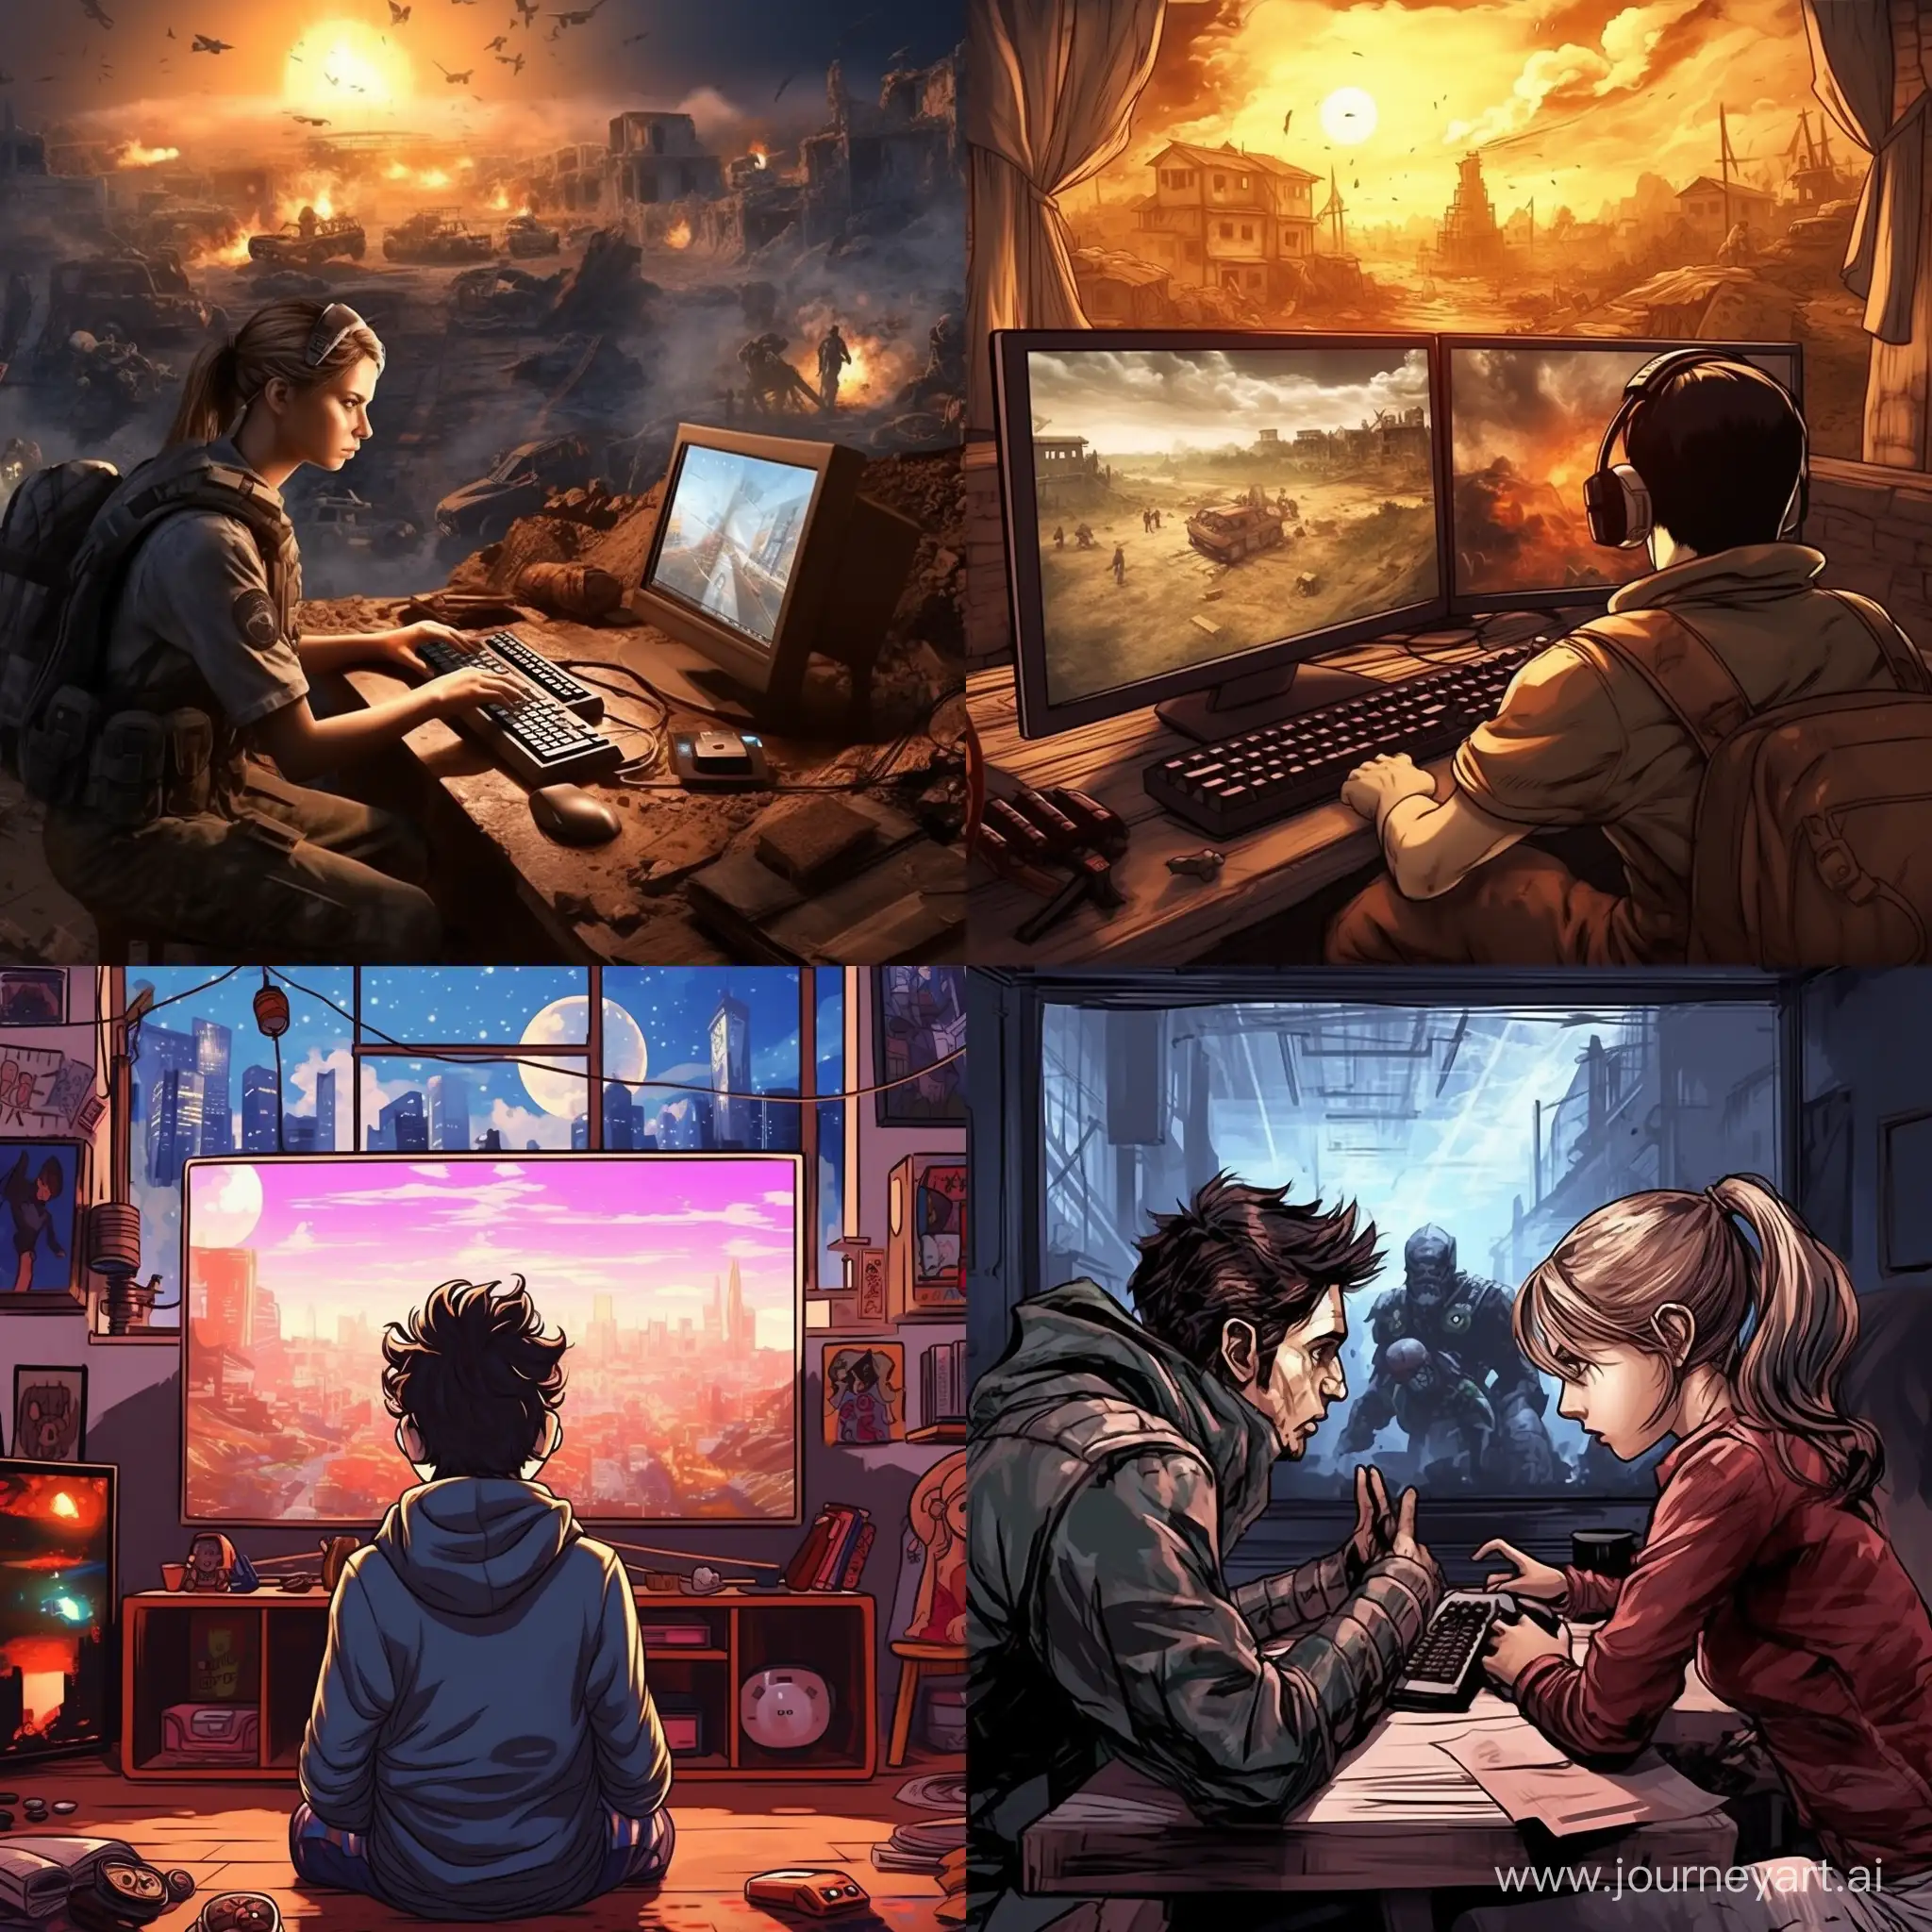 Video/Computer Games: Good or Bad for Teenagers? make an introduction image for a presentation, this image has to be a transparent image as a background to put on a PowerPoint sidle